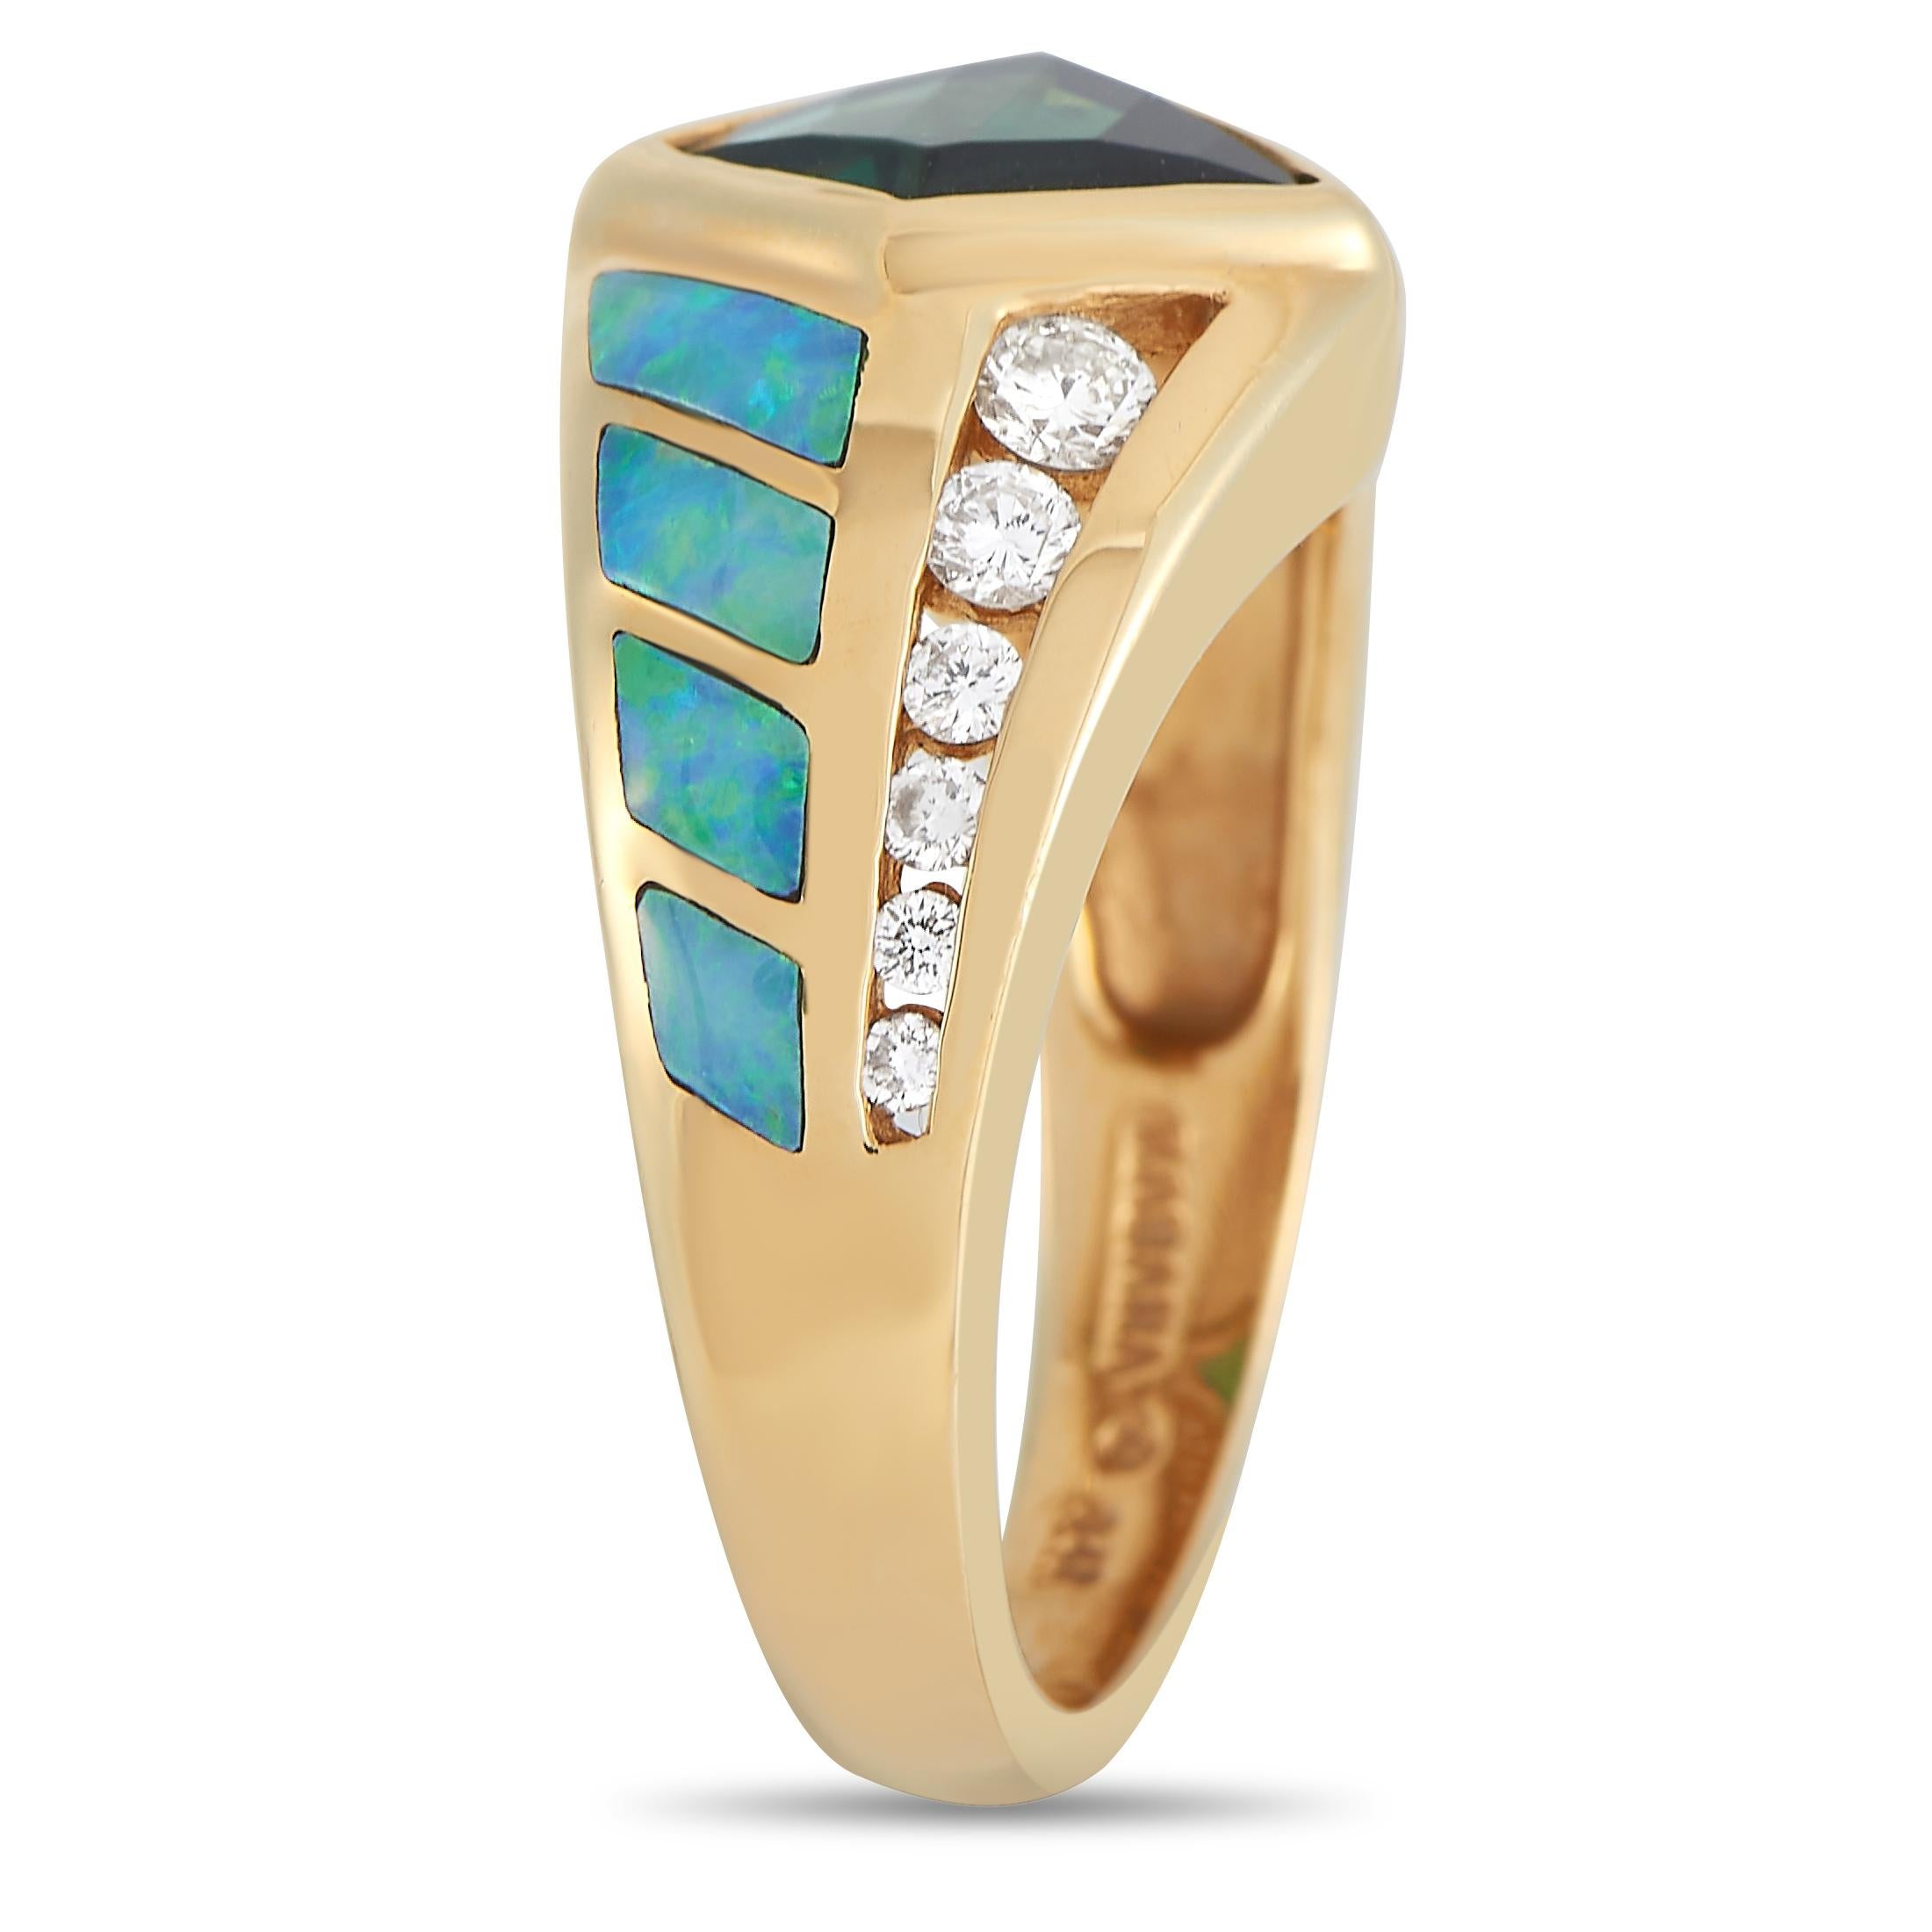 A striking geometric design makes this Kabana ring impossible to ignore. At the center, you’ll find a 1.10 carat tourmaline that’s flanked by inlaid opals and diamonds with a total weight of 0.35 carats. This piece features a 14K Yellow Gold